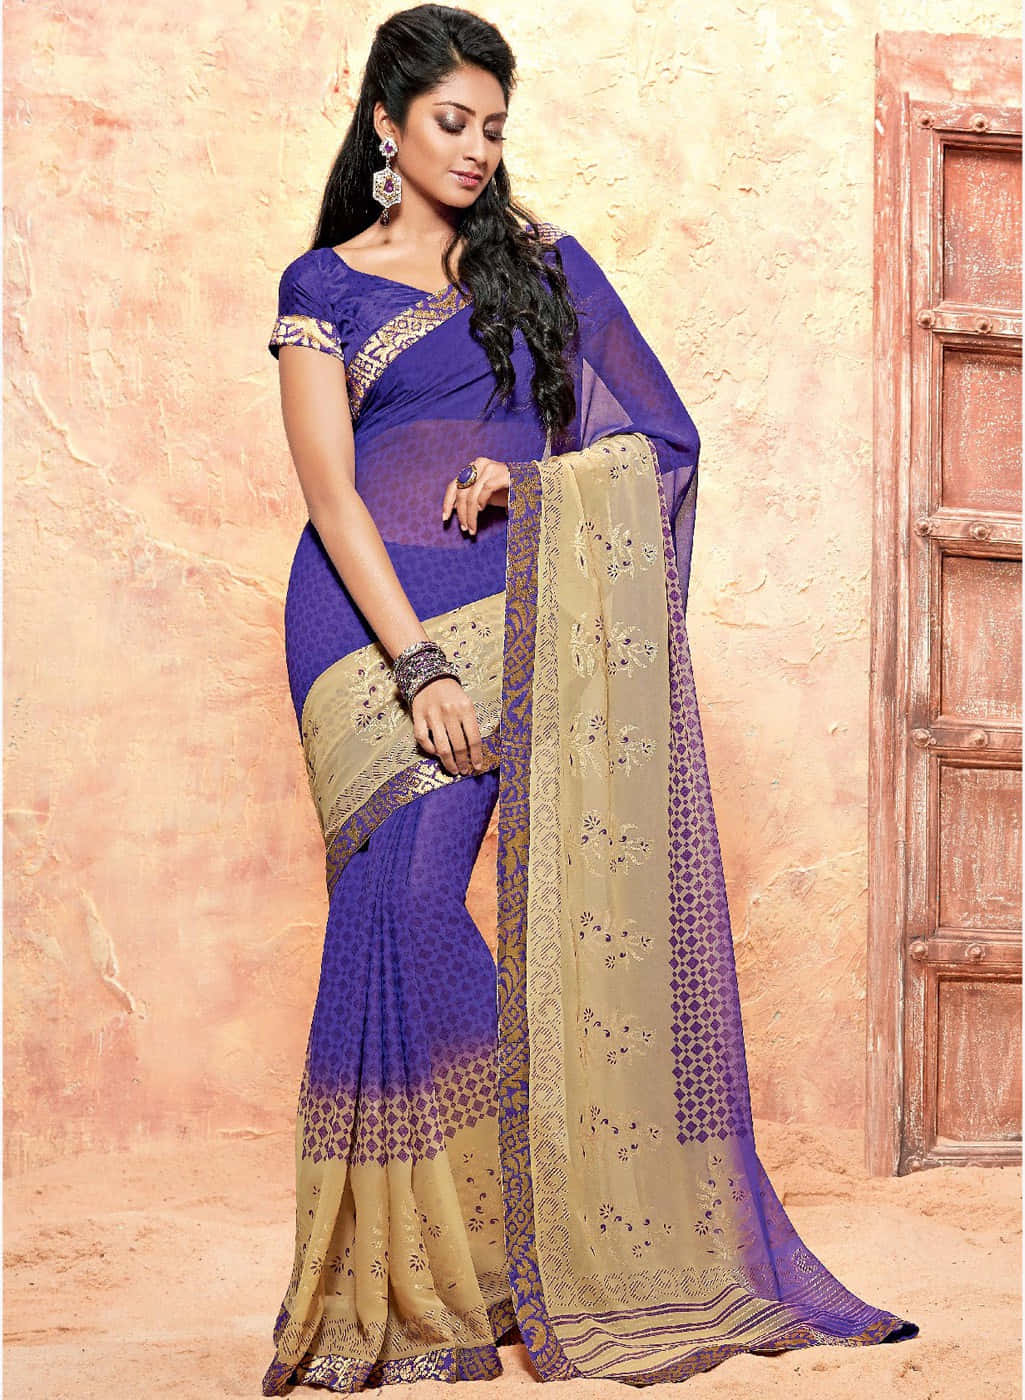 A Beautiful Woman In A Blue And Gold Saree